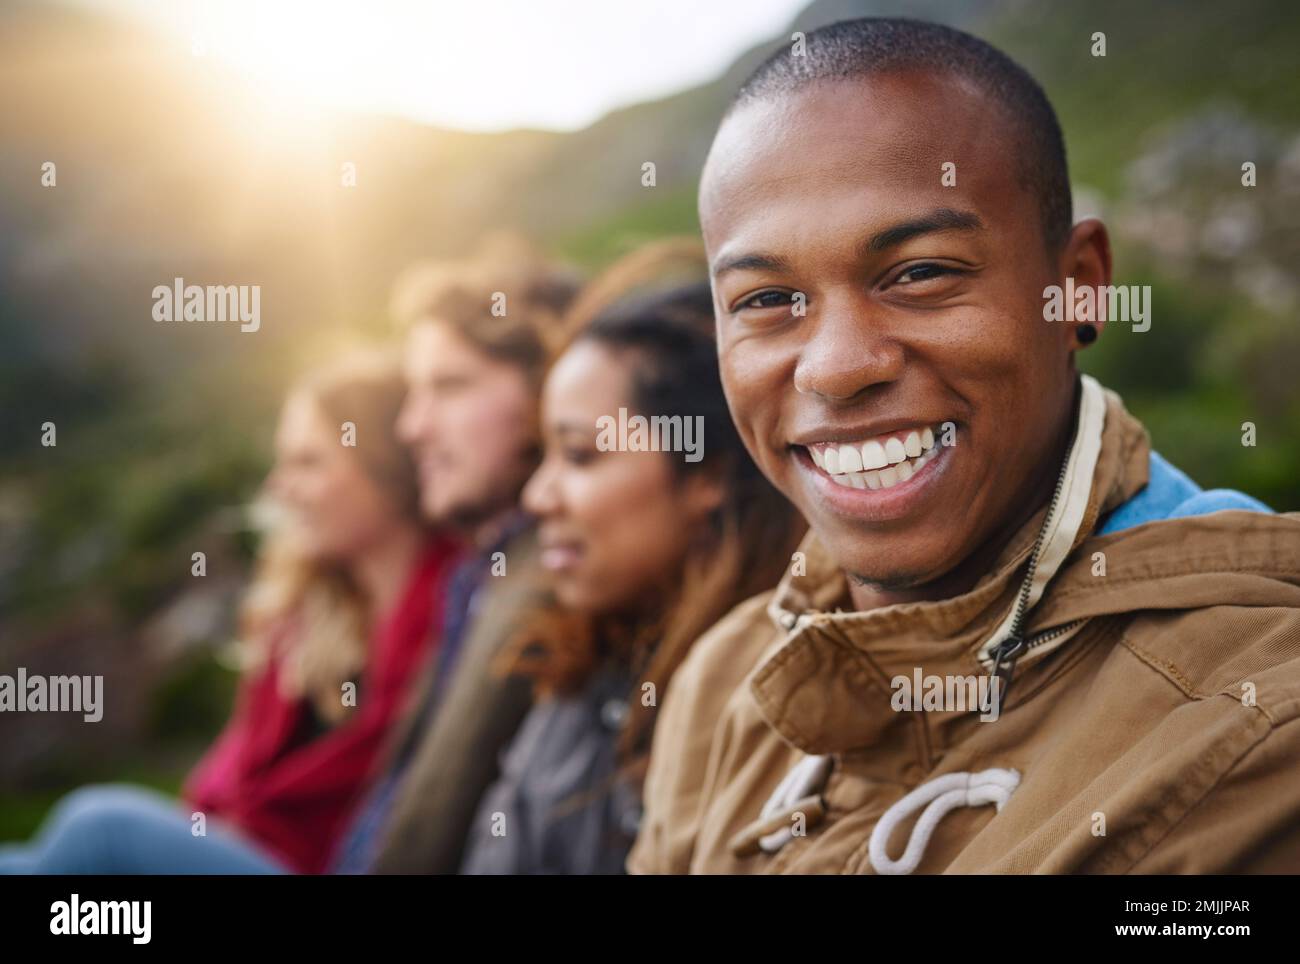 Keep your friends close. Portrait of a happy young man hanging out with his friends outside. Stock Photo